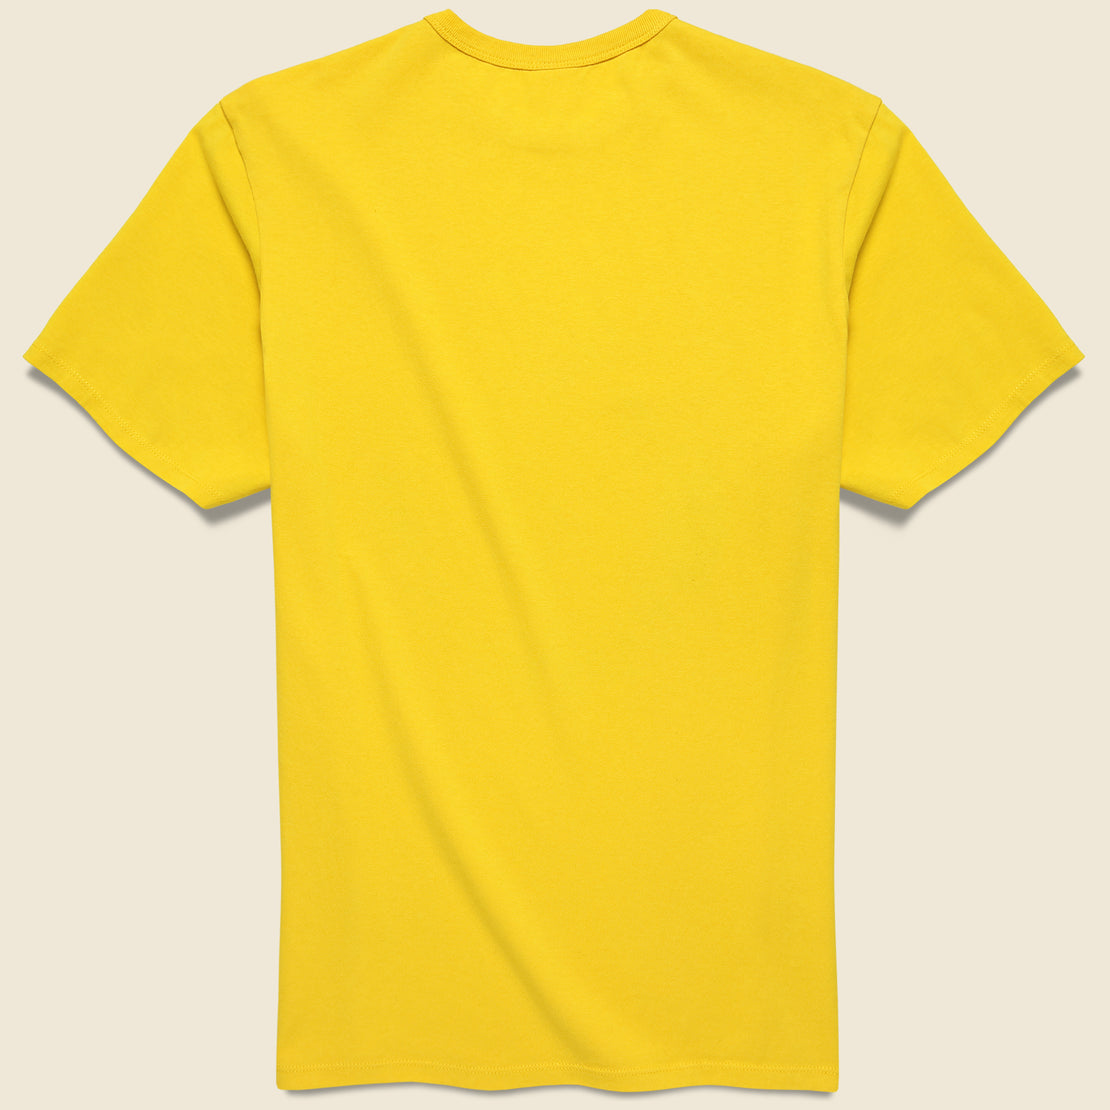 Keep It Clean Keep It Green Tee - Yellow - TSPTR - STAG Provisions - Tops - S/S Tee - Graphic